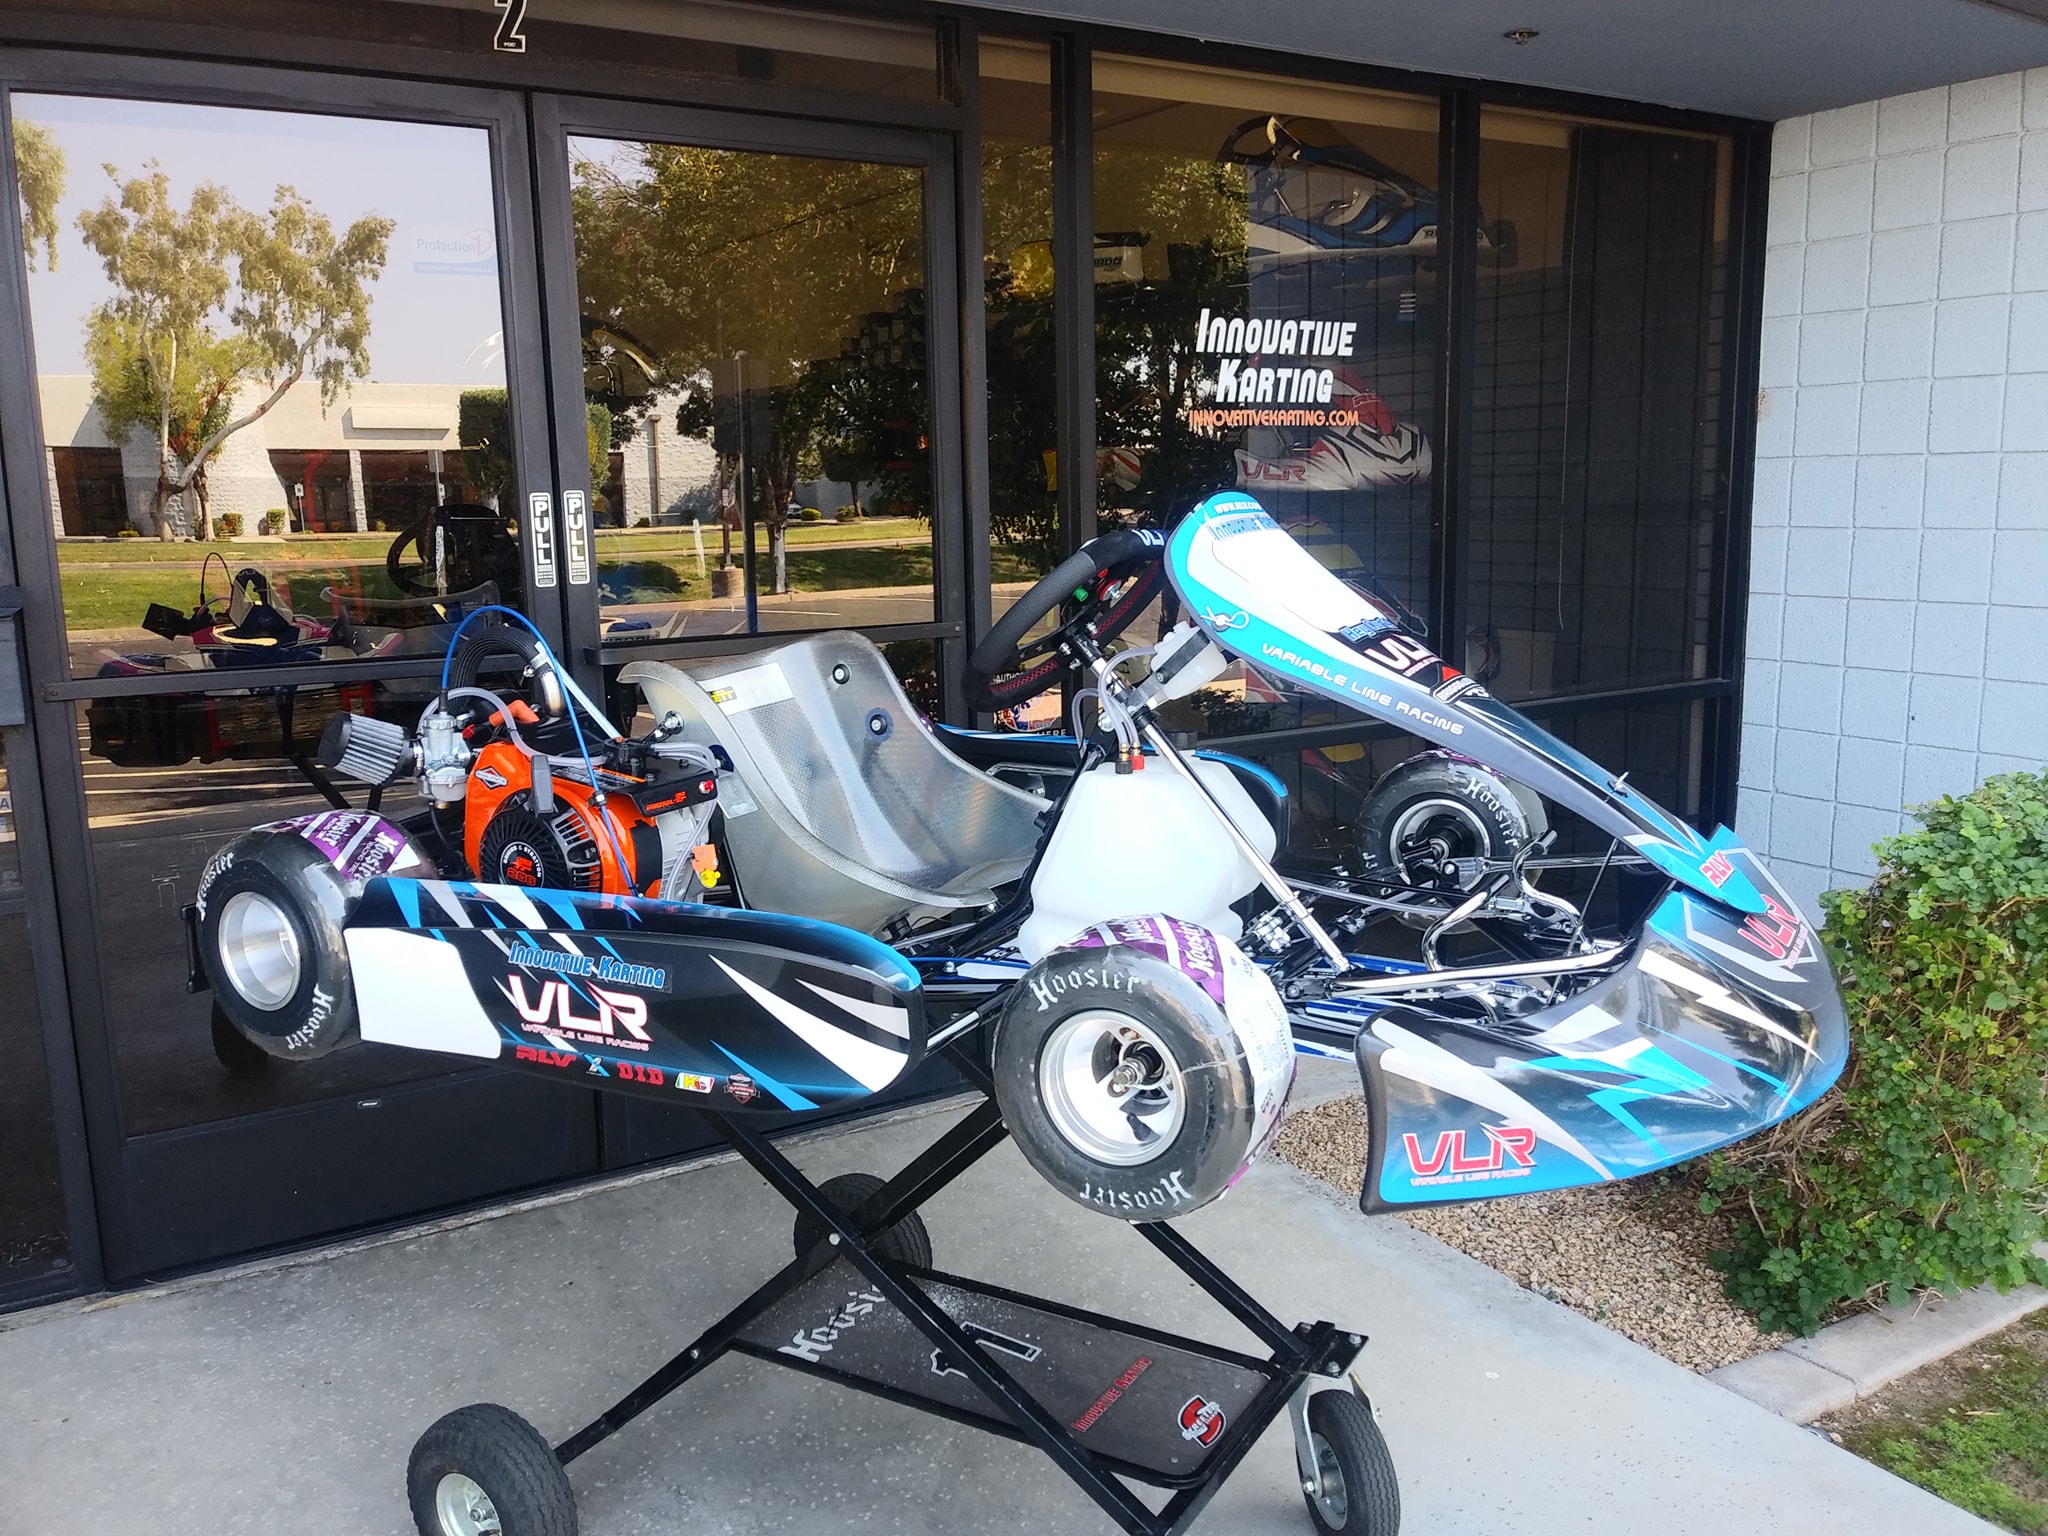 WORD Racing  Oregon Kart Shop and Auto Racing Safety Supplier - Tony Kart  & Italkart Authorized Dealer